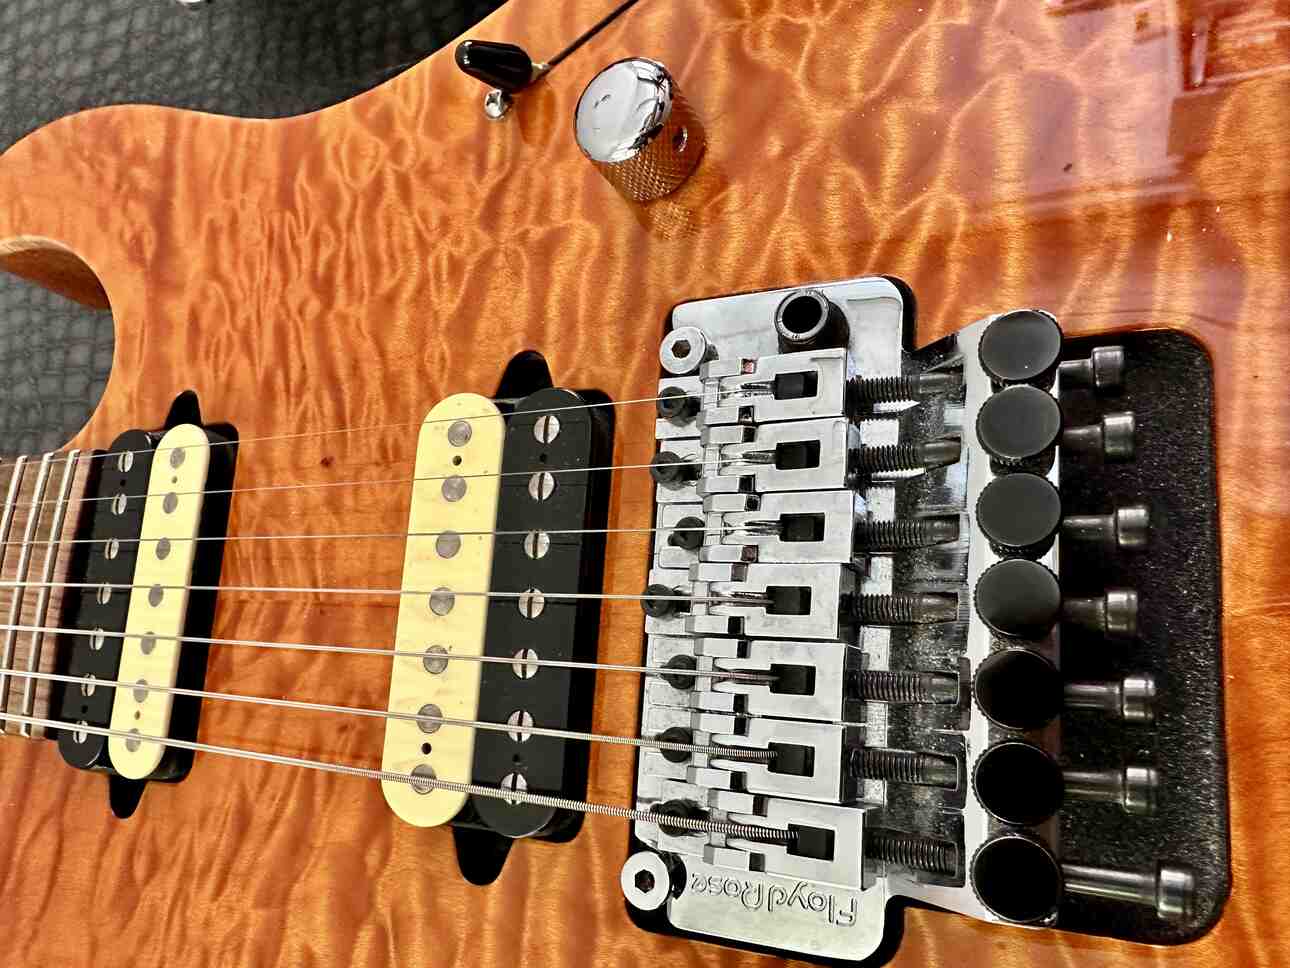 Closeup of Suhr pickups on a Suhr electric guitar.